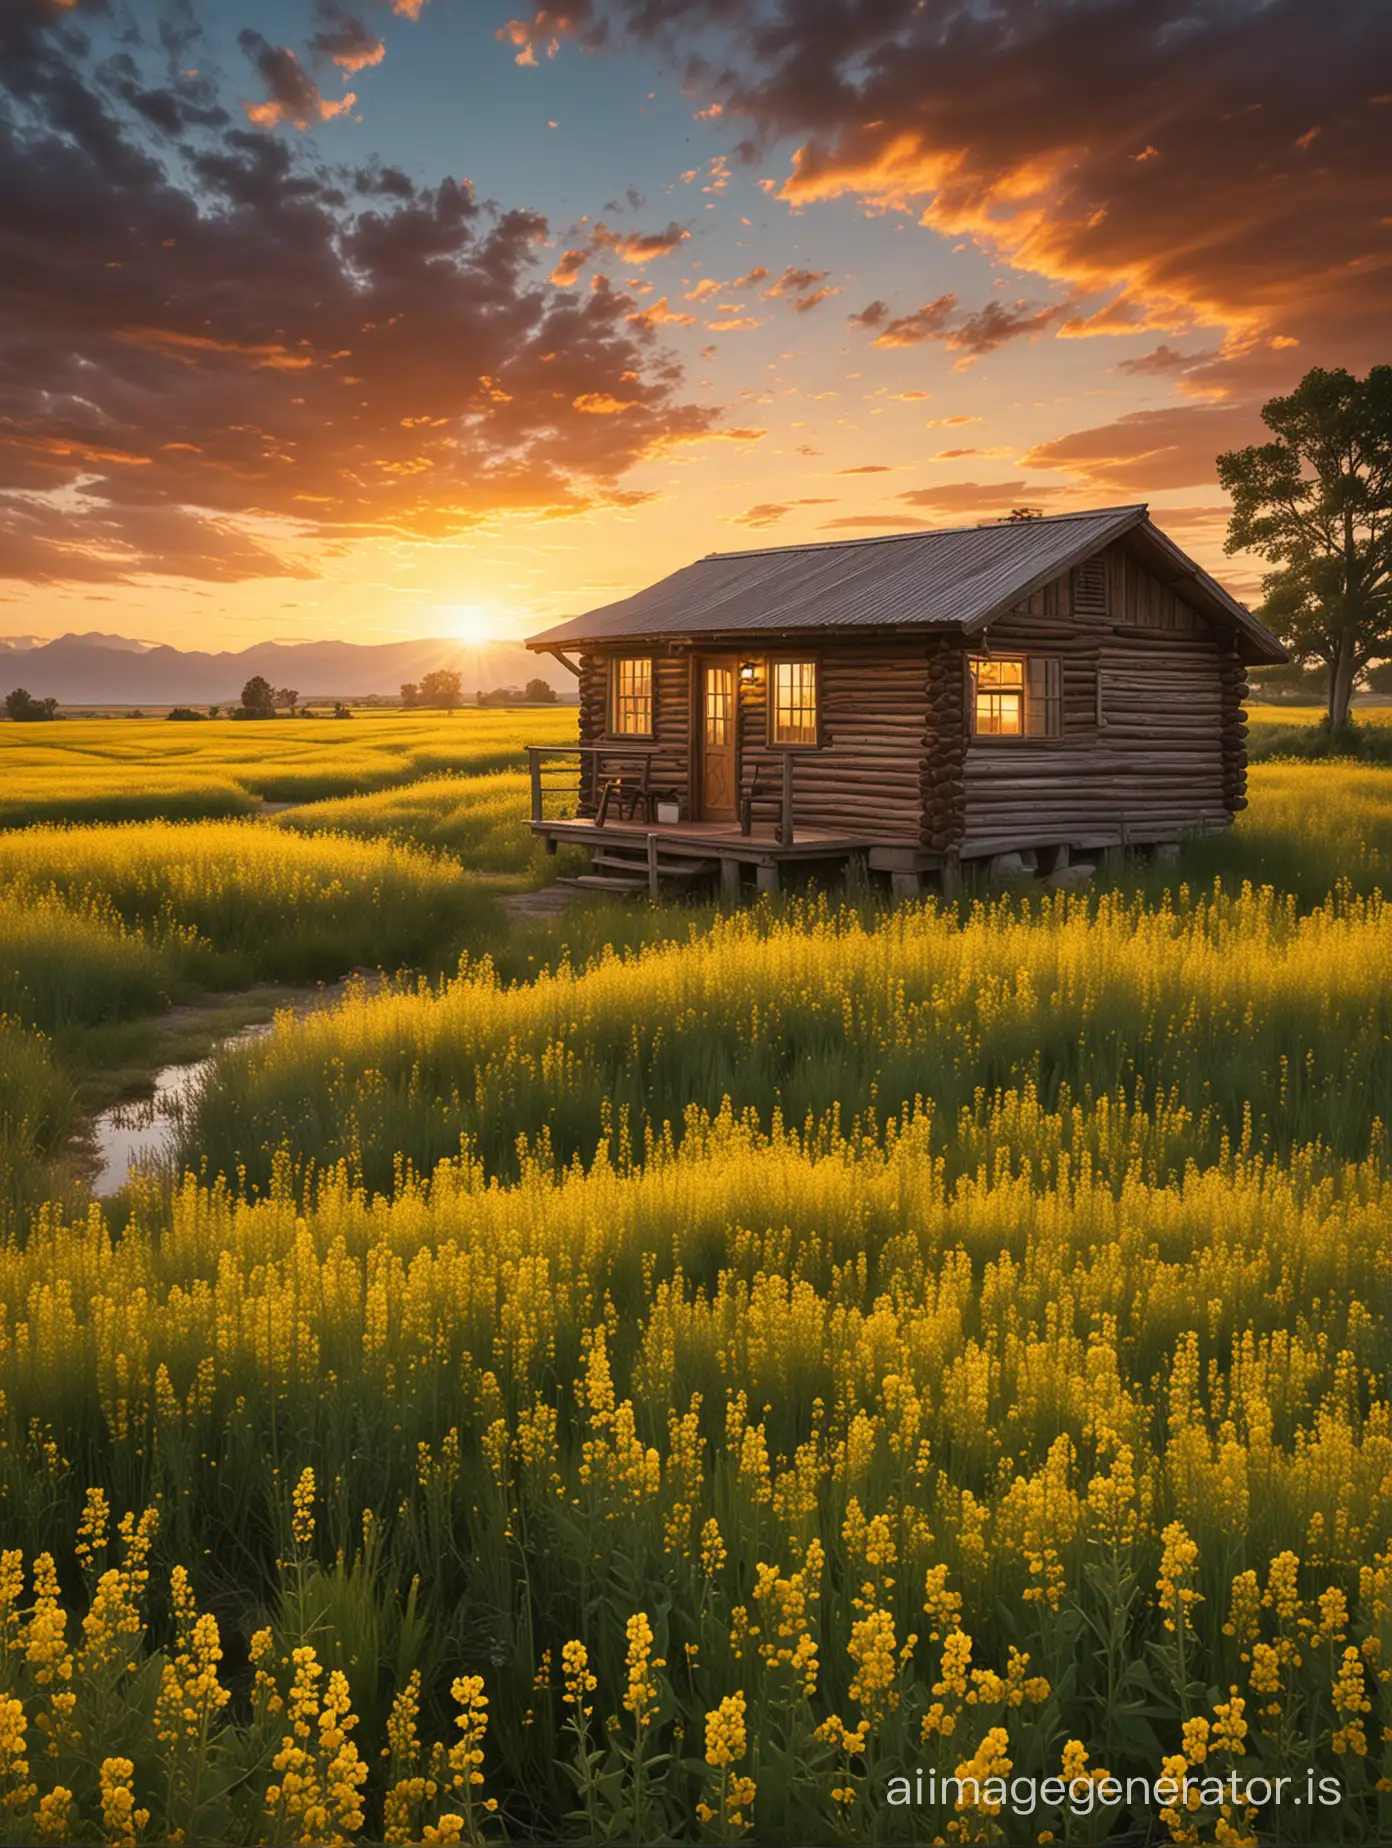 This prompt creates a cozy, tranquil scene with a small cabin nestled in vivid yellow canola blooms. The golden hour lighting and sunset sky colors infuse the image with warmth. It conveys themes of peace, solitude, and living in harmony with nature.